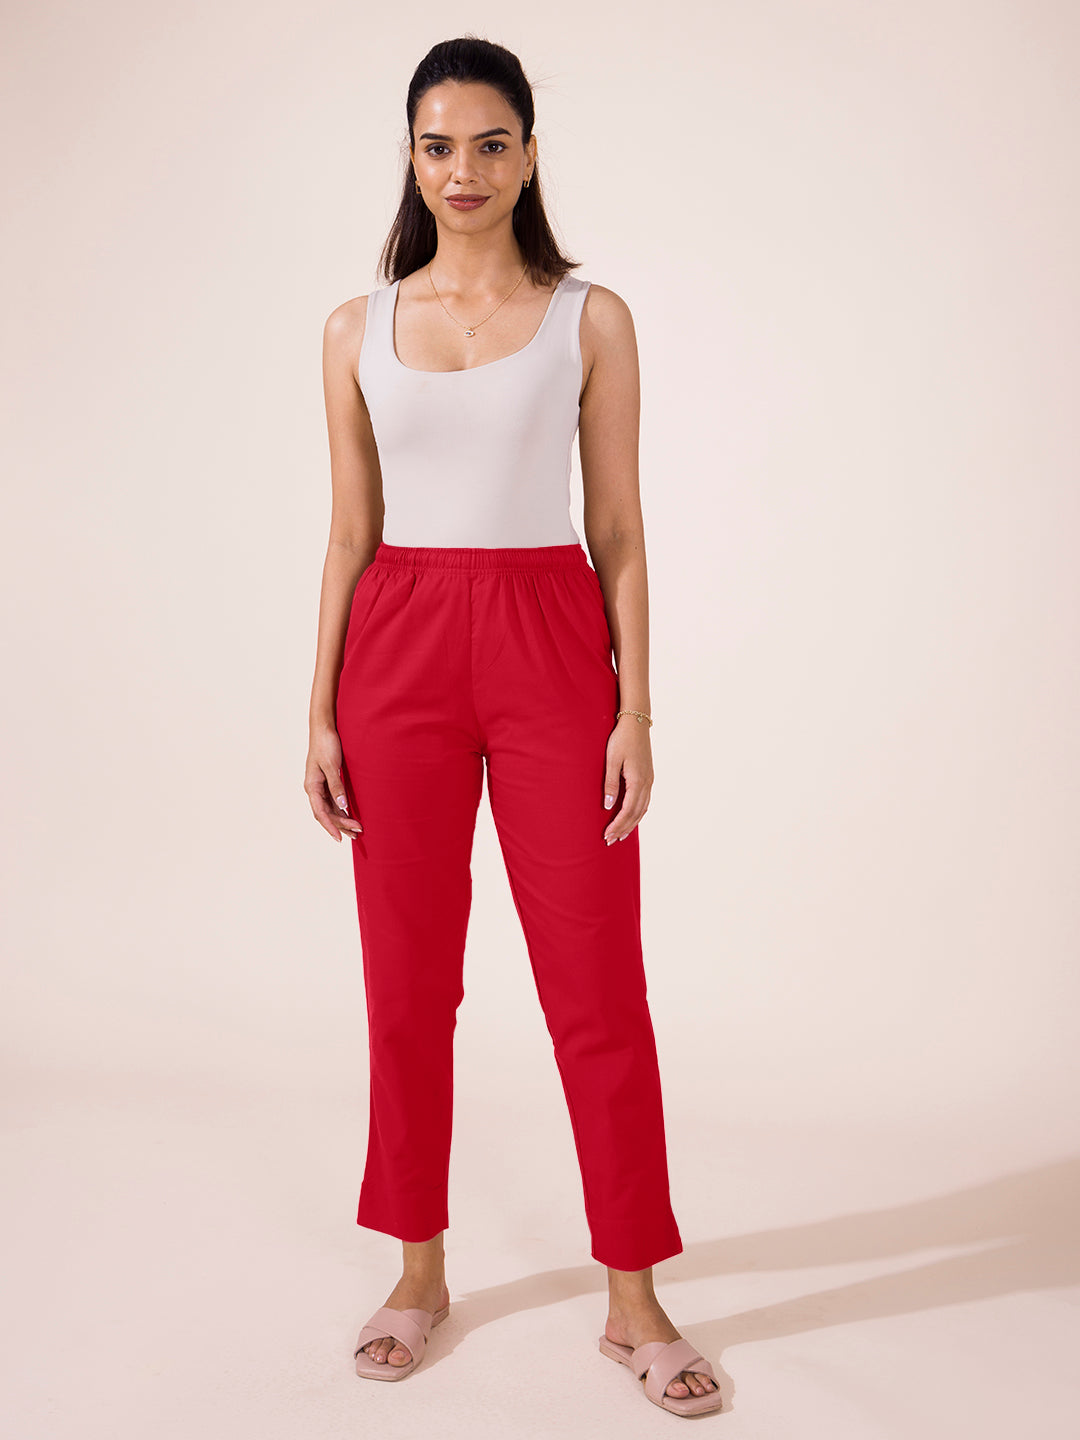 Pencil Bottom Trousers - Buy Pencil Bottom Trousers online in India